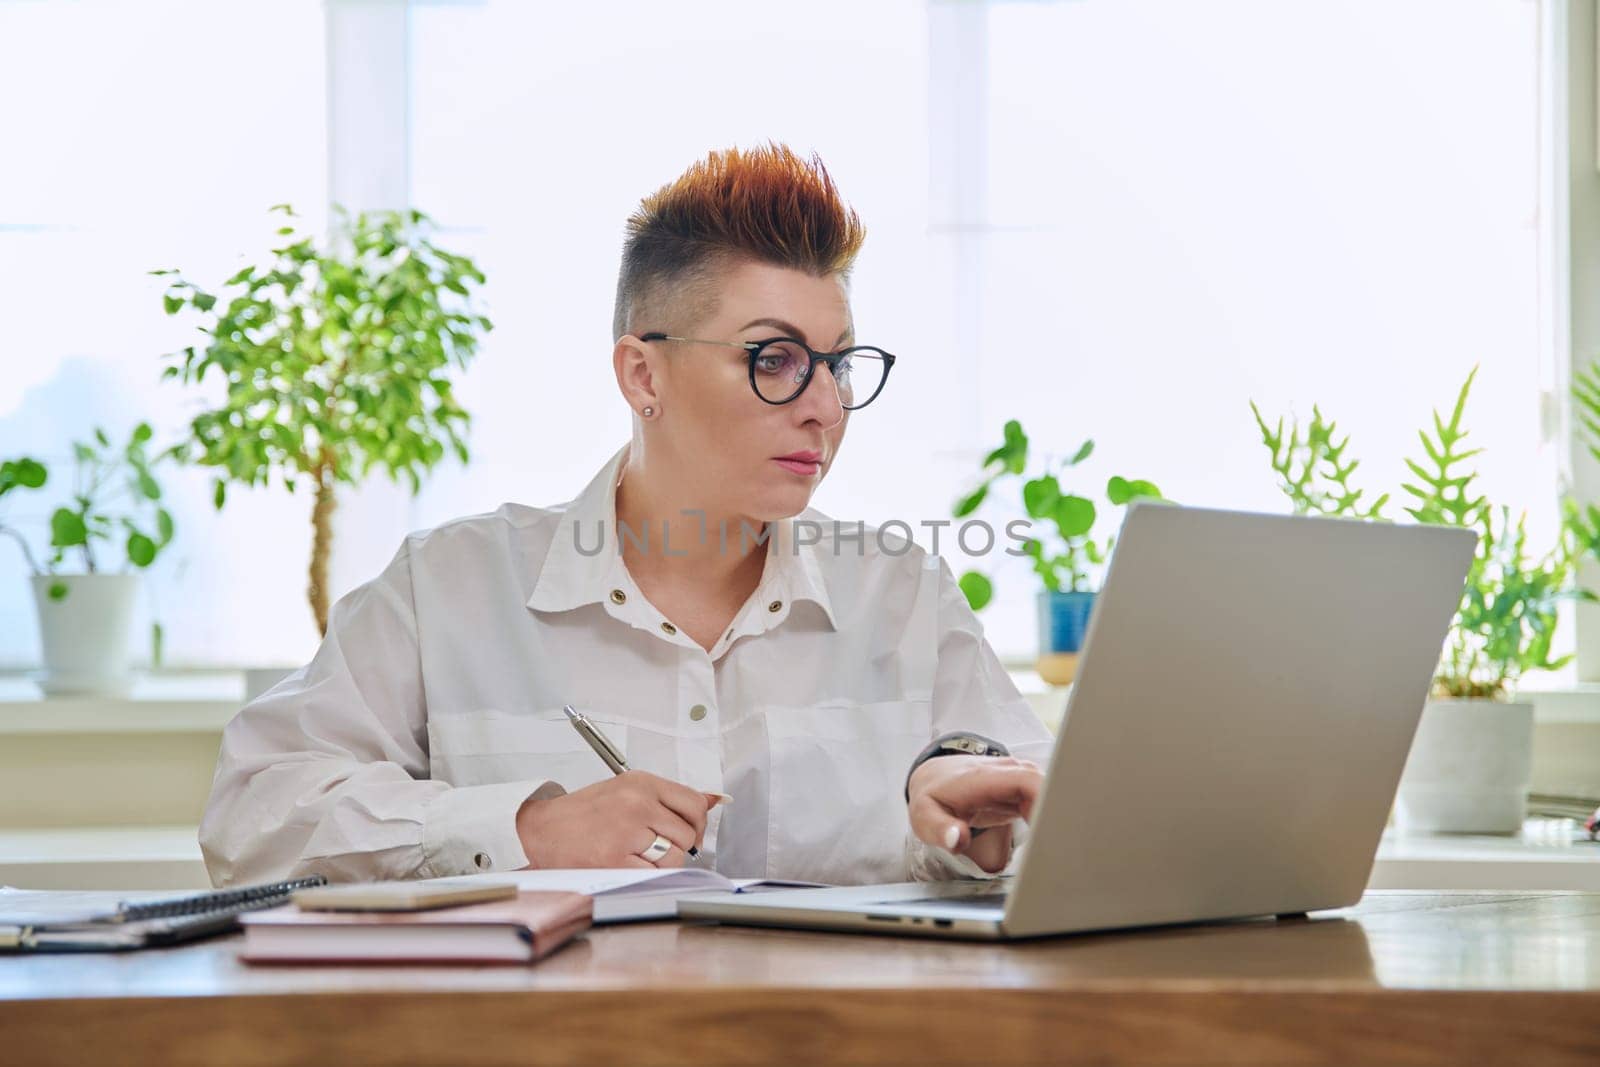 Middle-aged serious woman working at computer laptop in home office. Mature female sitting at desk typing and looking at monitor. Remote business, teaching, work, blogging, freelance